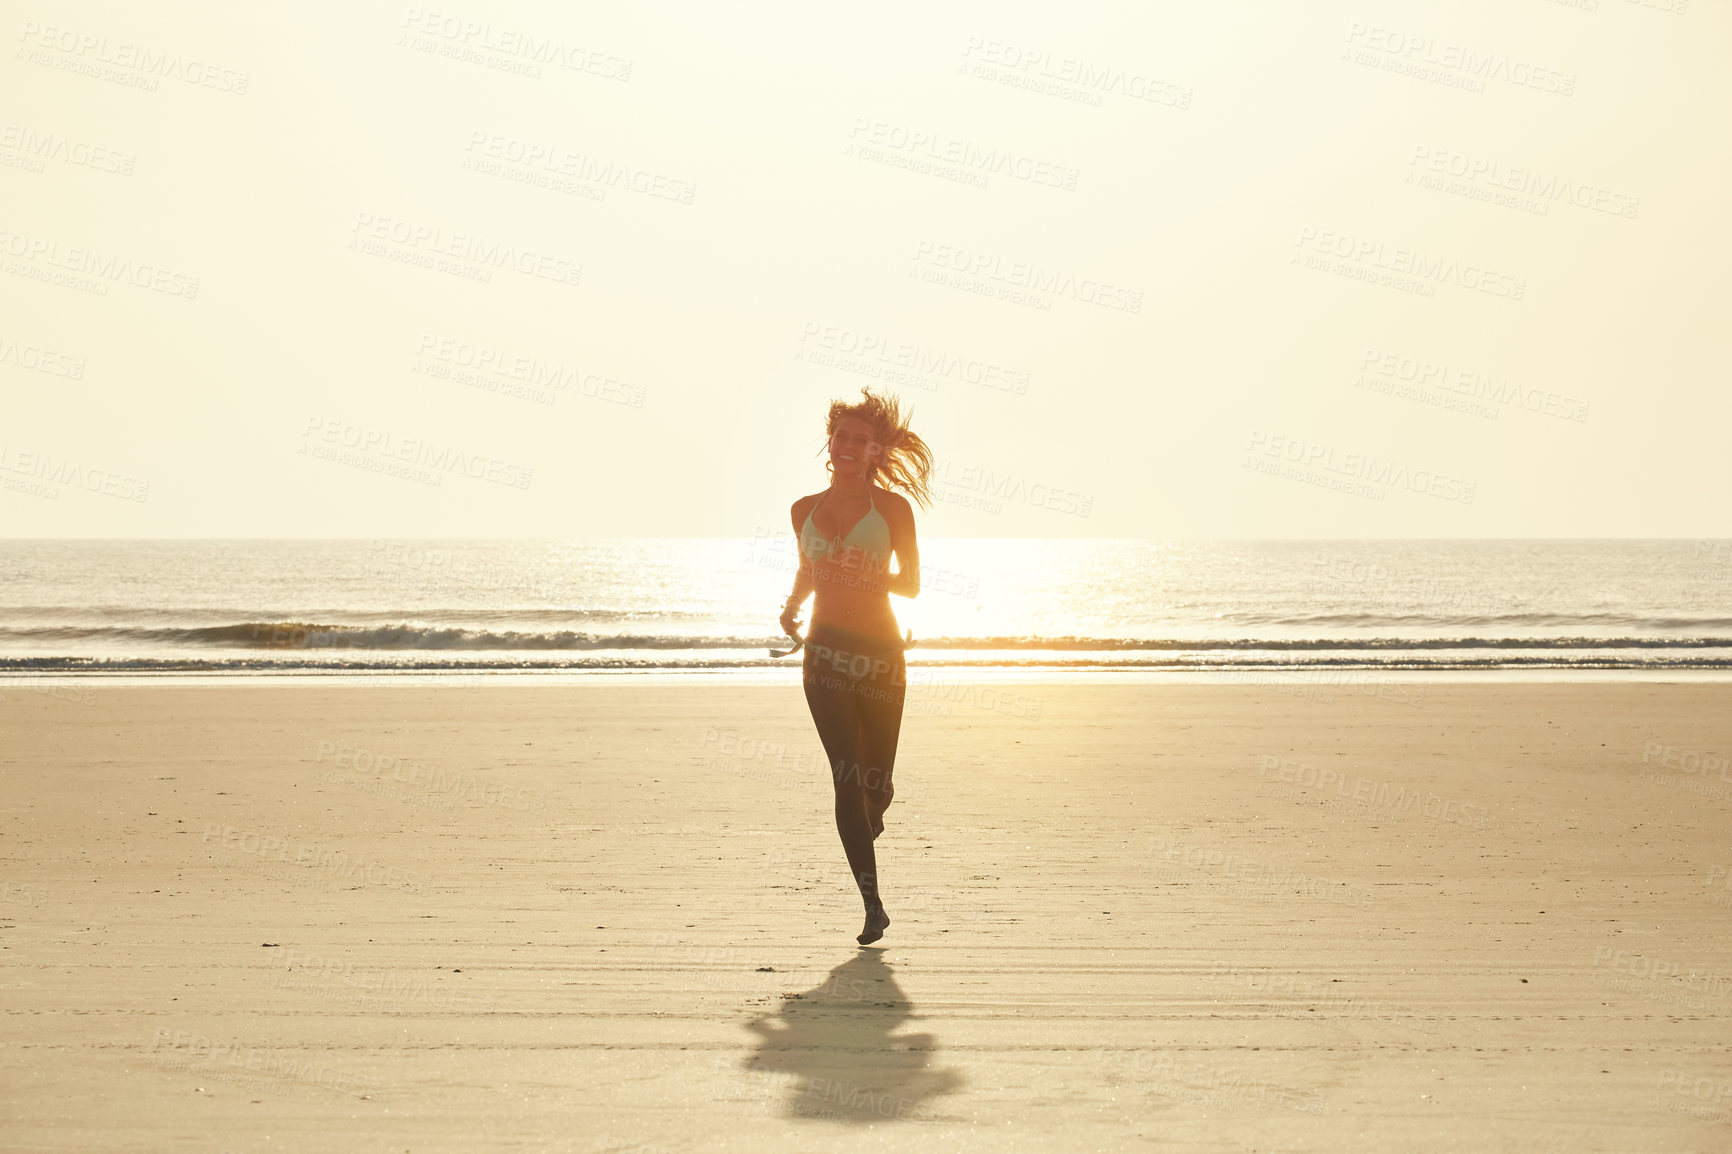 Buy stock photo Portrait of an attractive young woman running on the beach